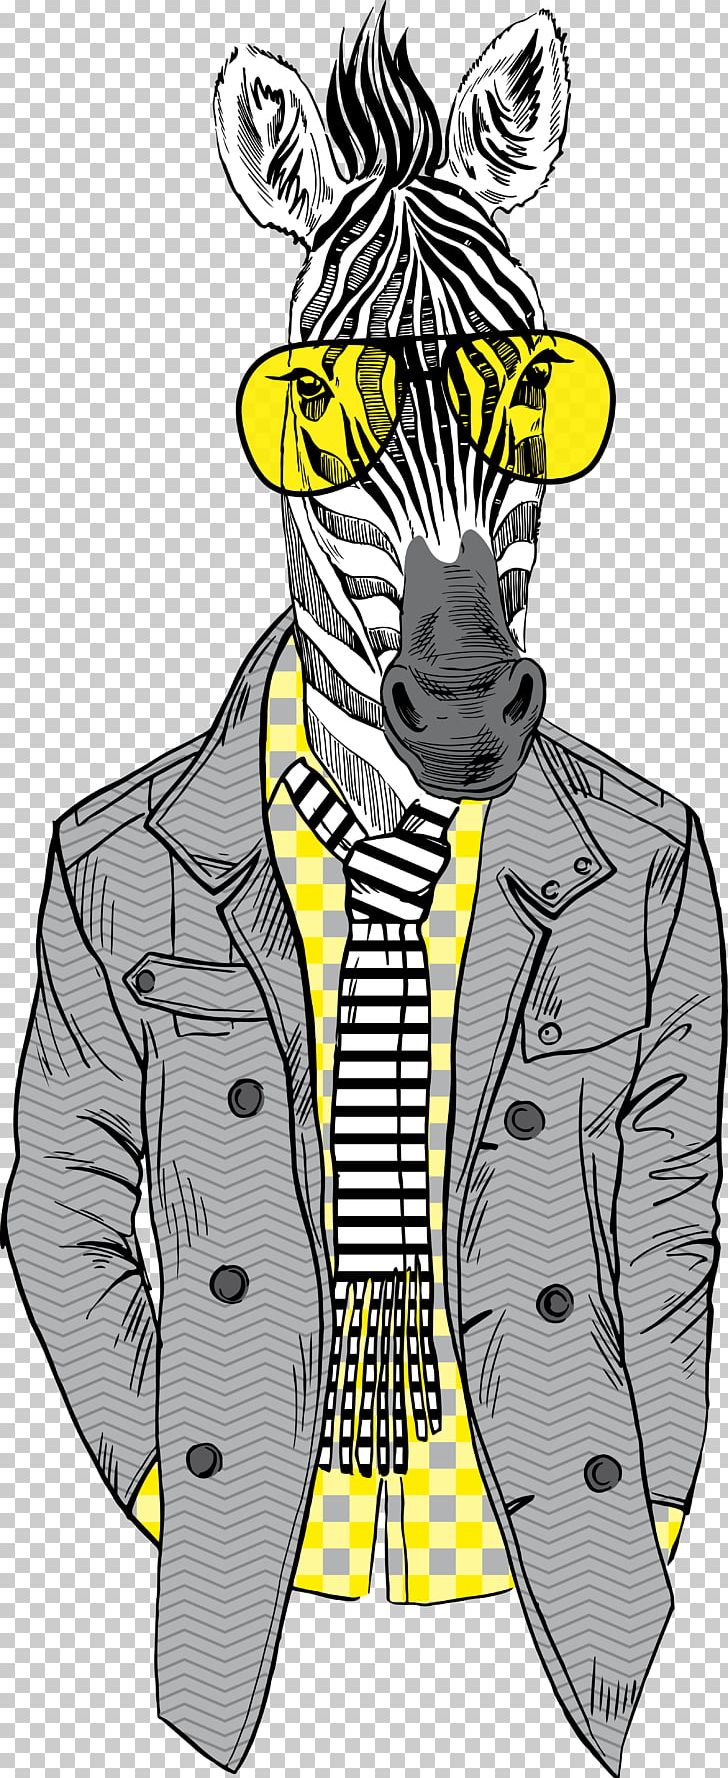 Horse Fashion Illustration Zebra PNG, Clipart, Animal, Animals, Fashion, Fictional Character, Giraffe Free PNG Download